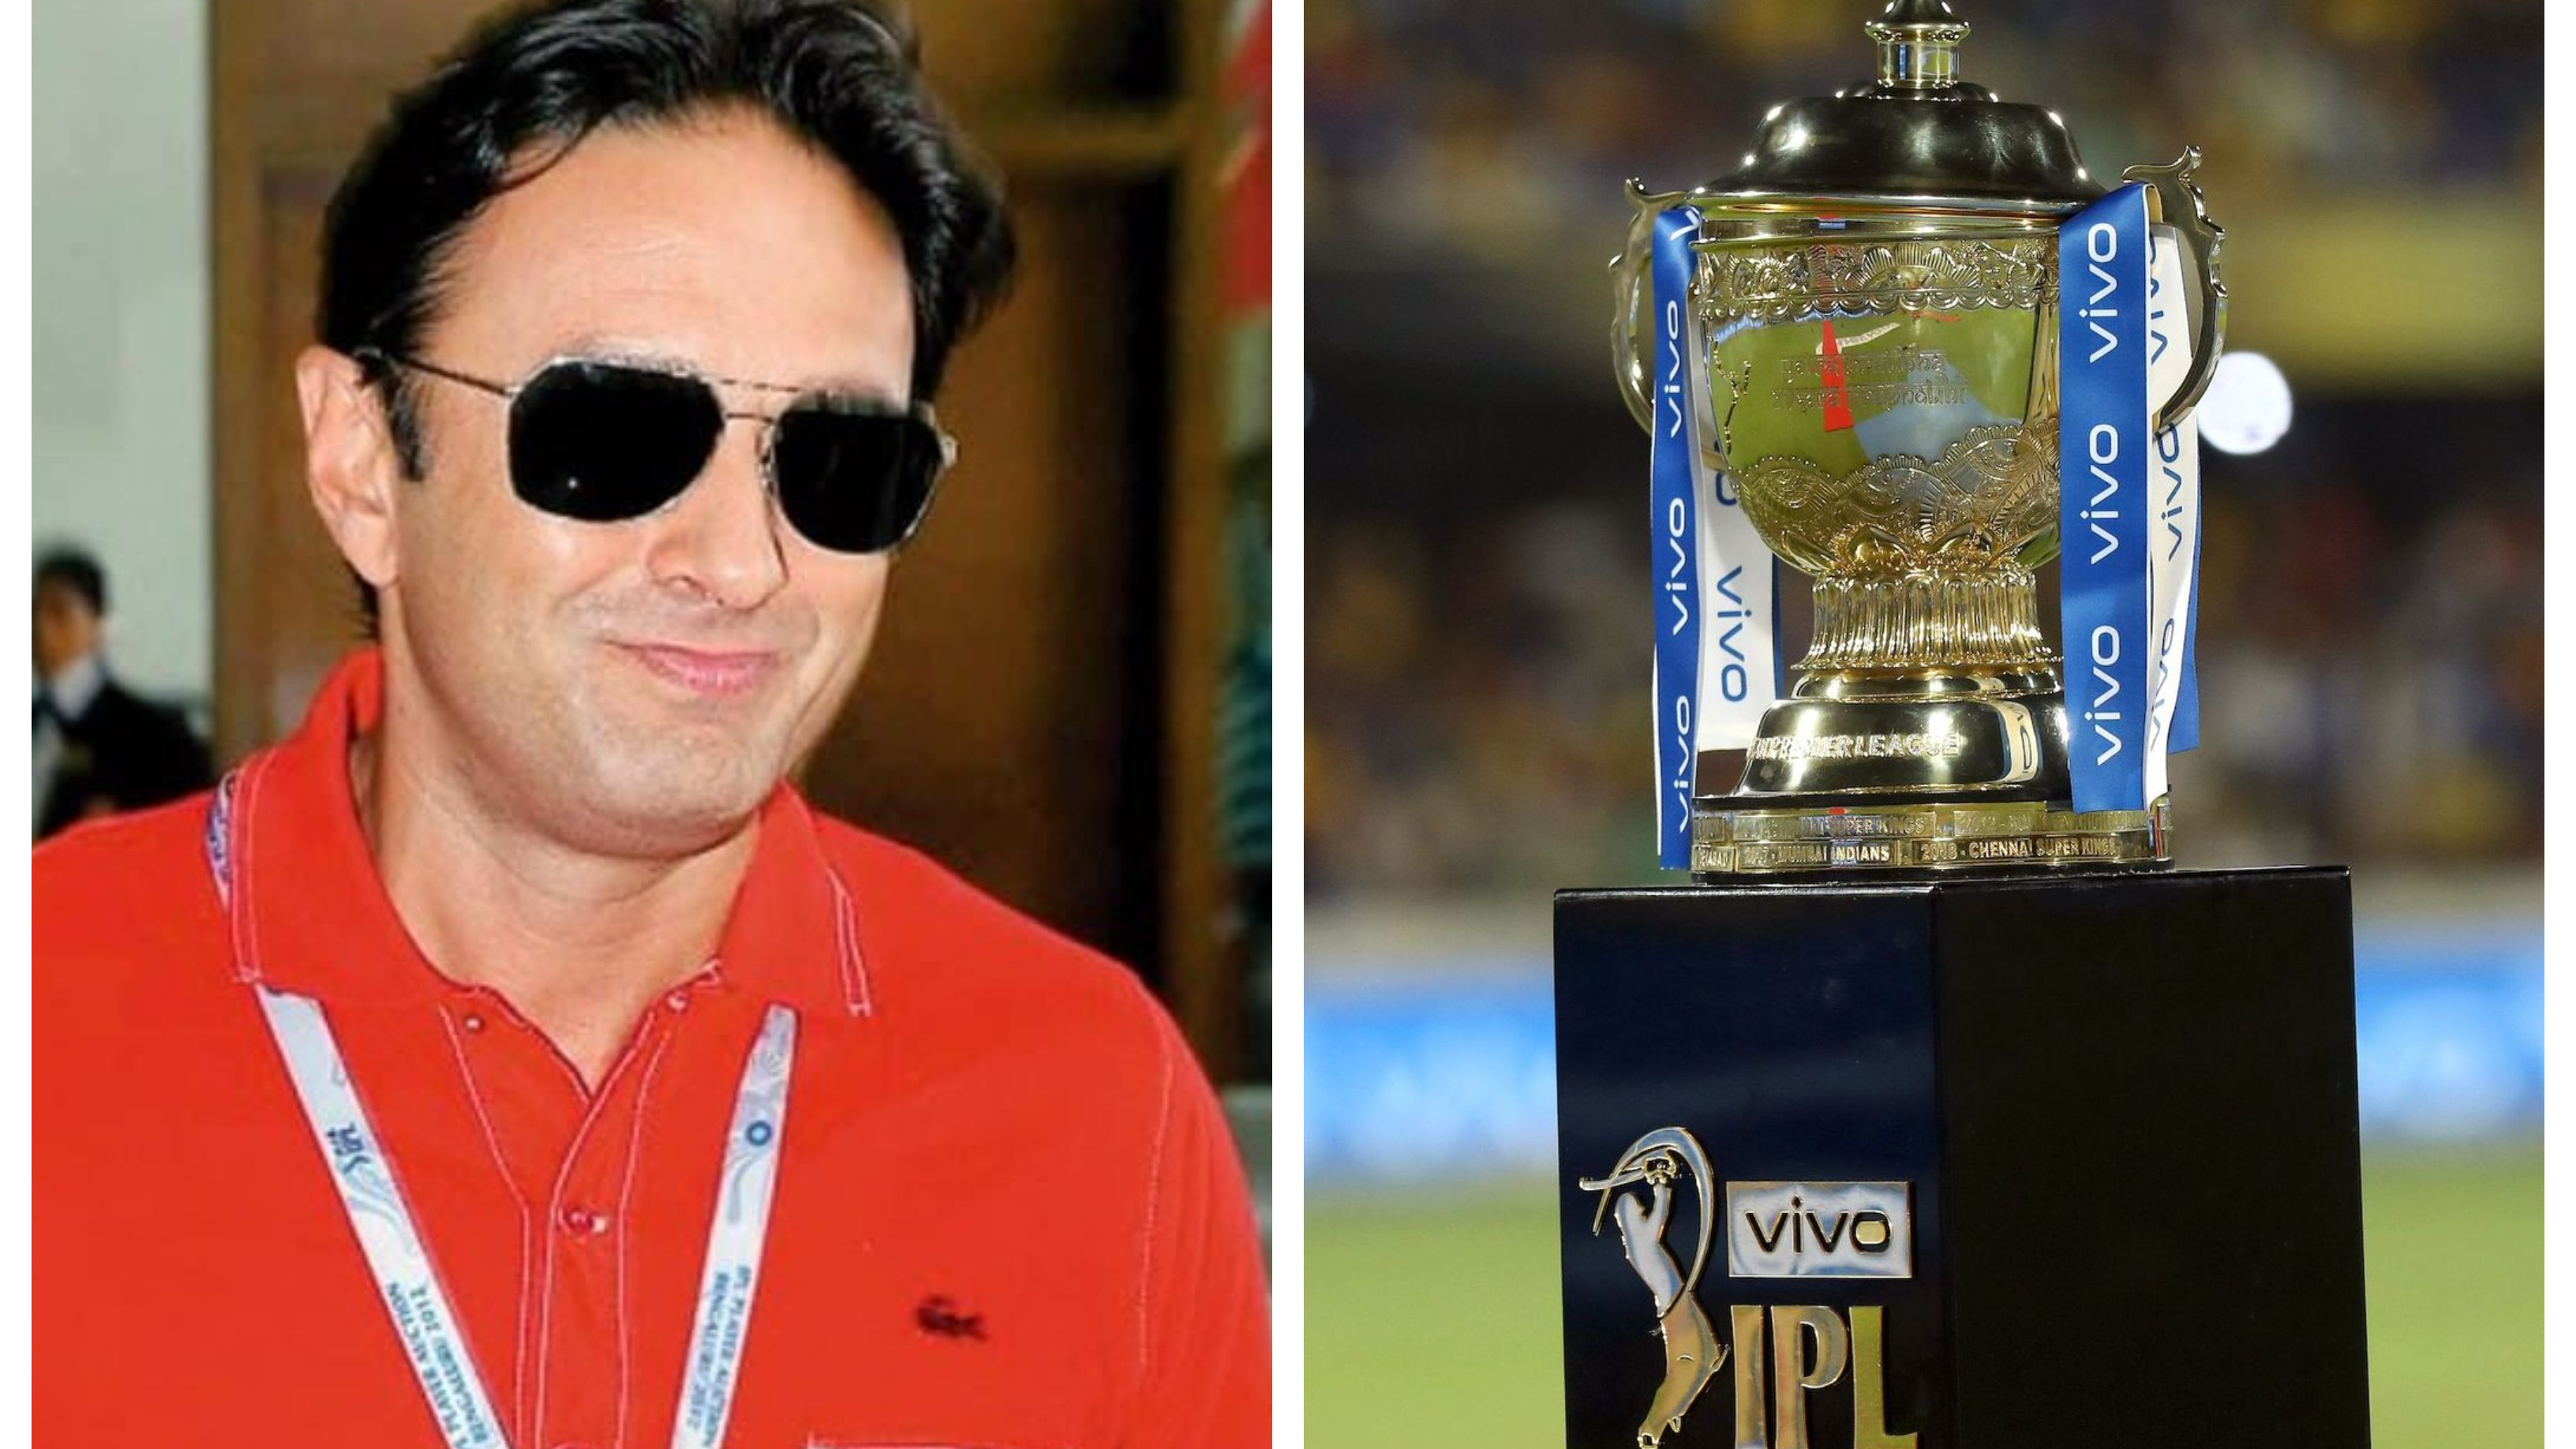 PBKS co-owner Ness Wadia wants BCCI to allow IPL teams to play exhibition games overseas in off-season